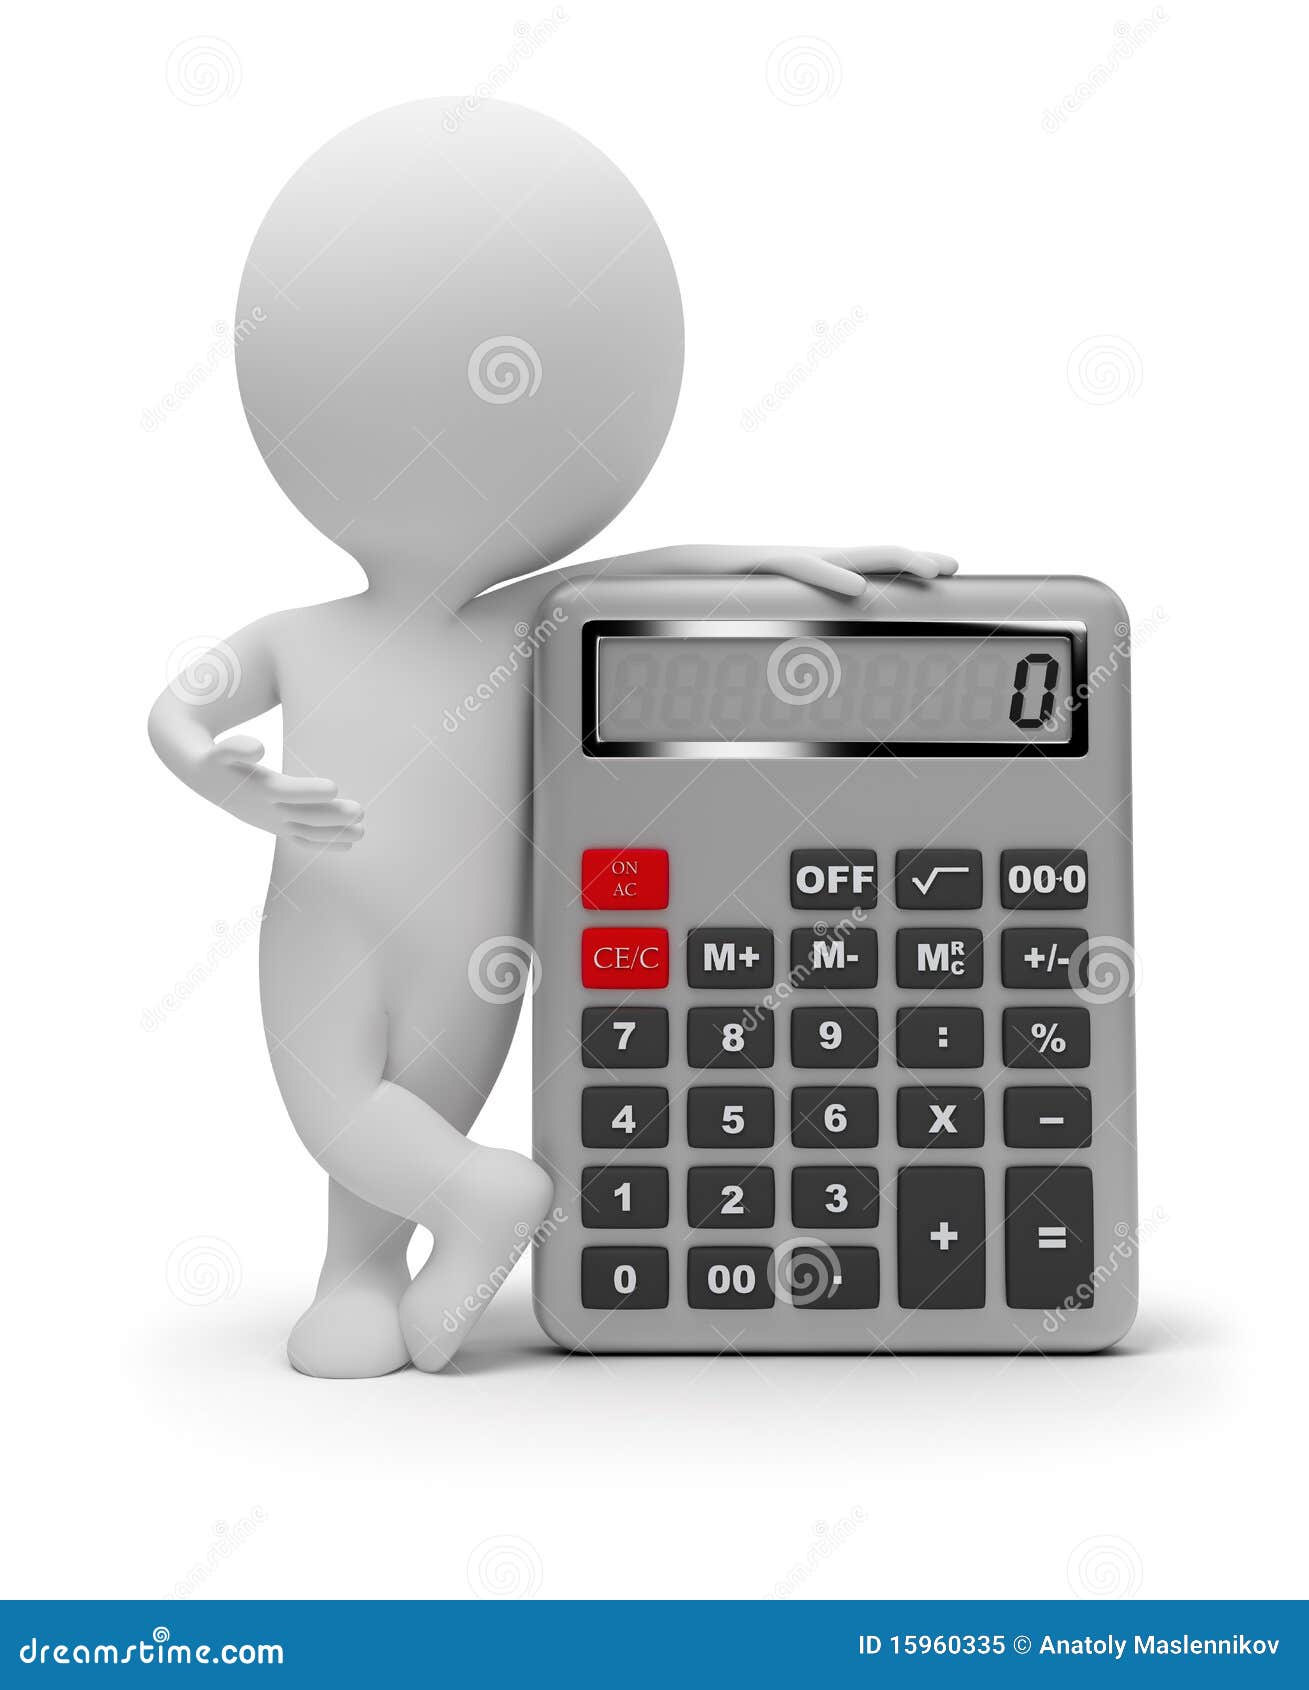 3d small people - calculator